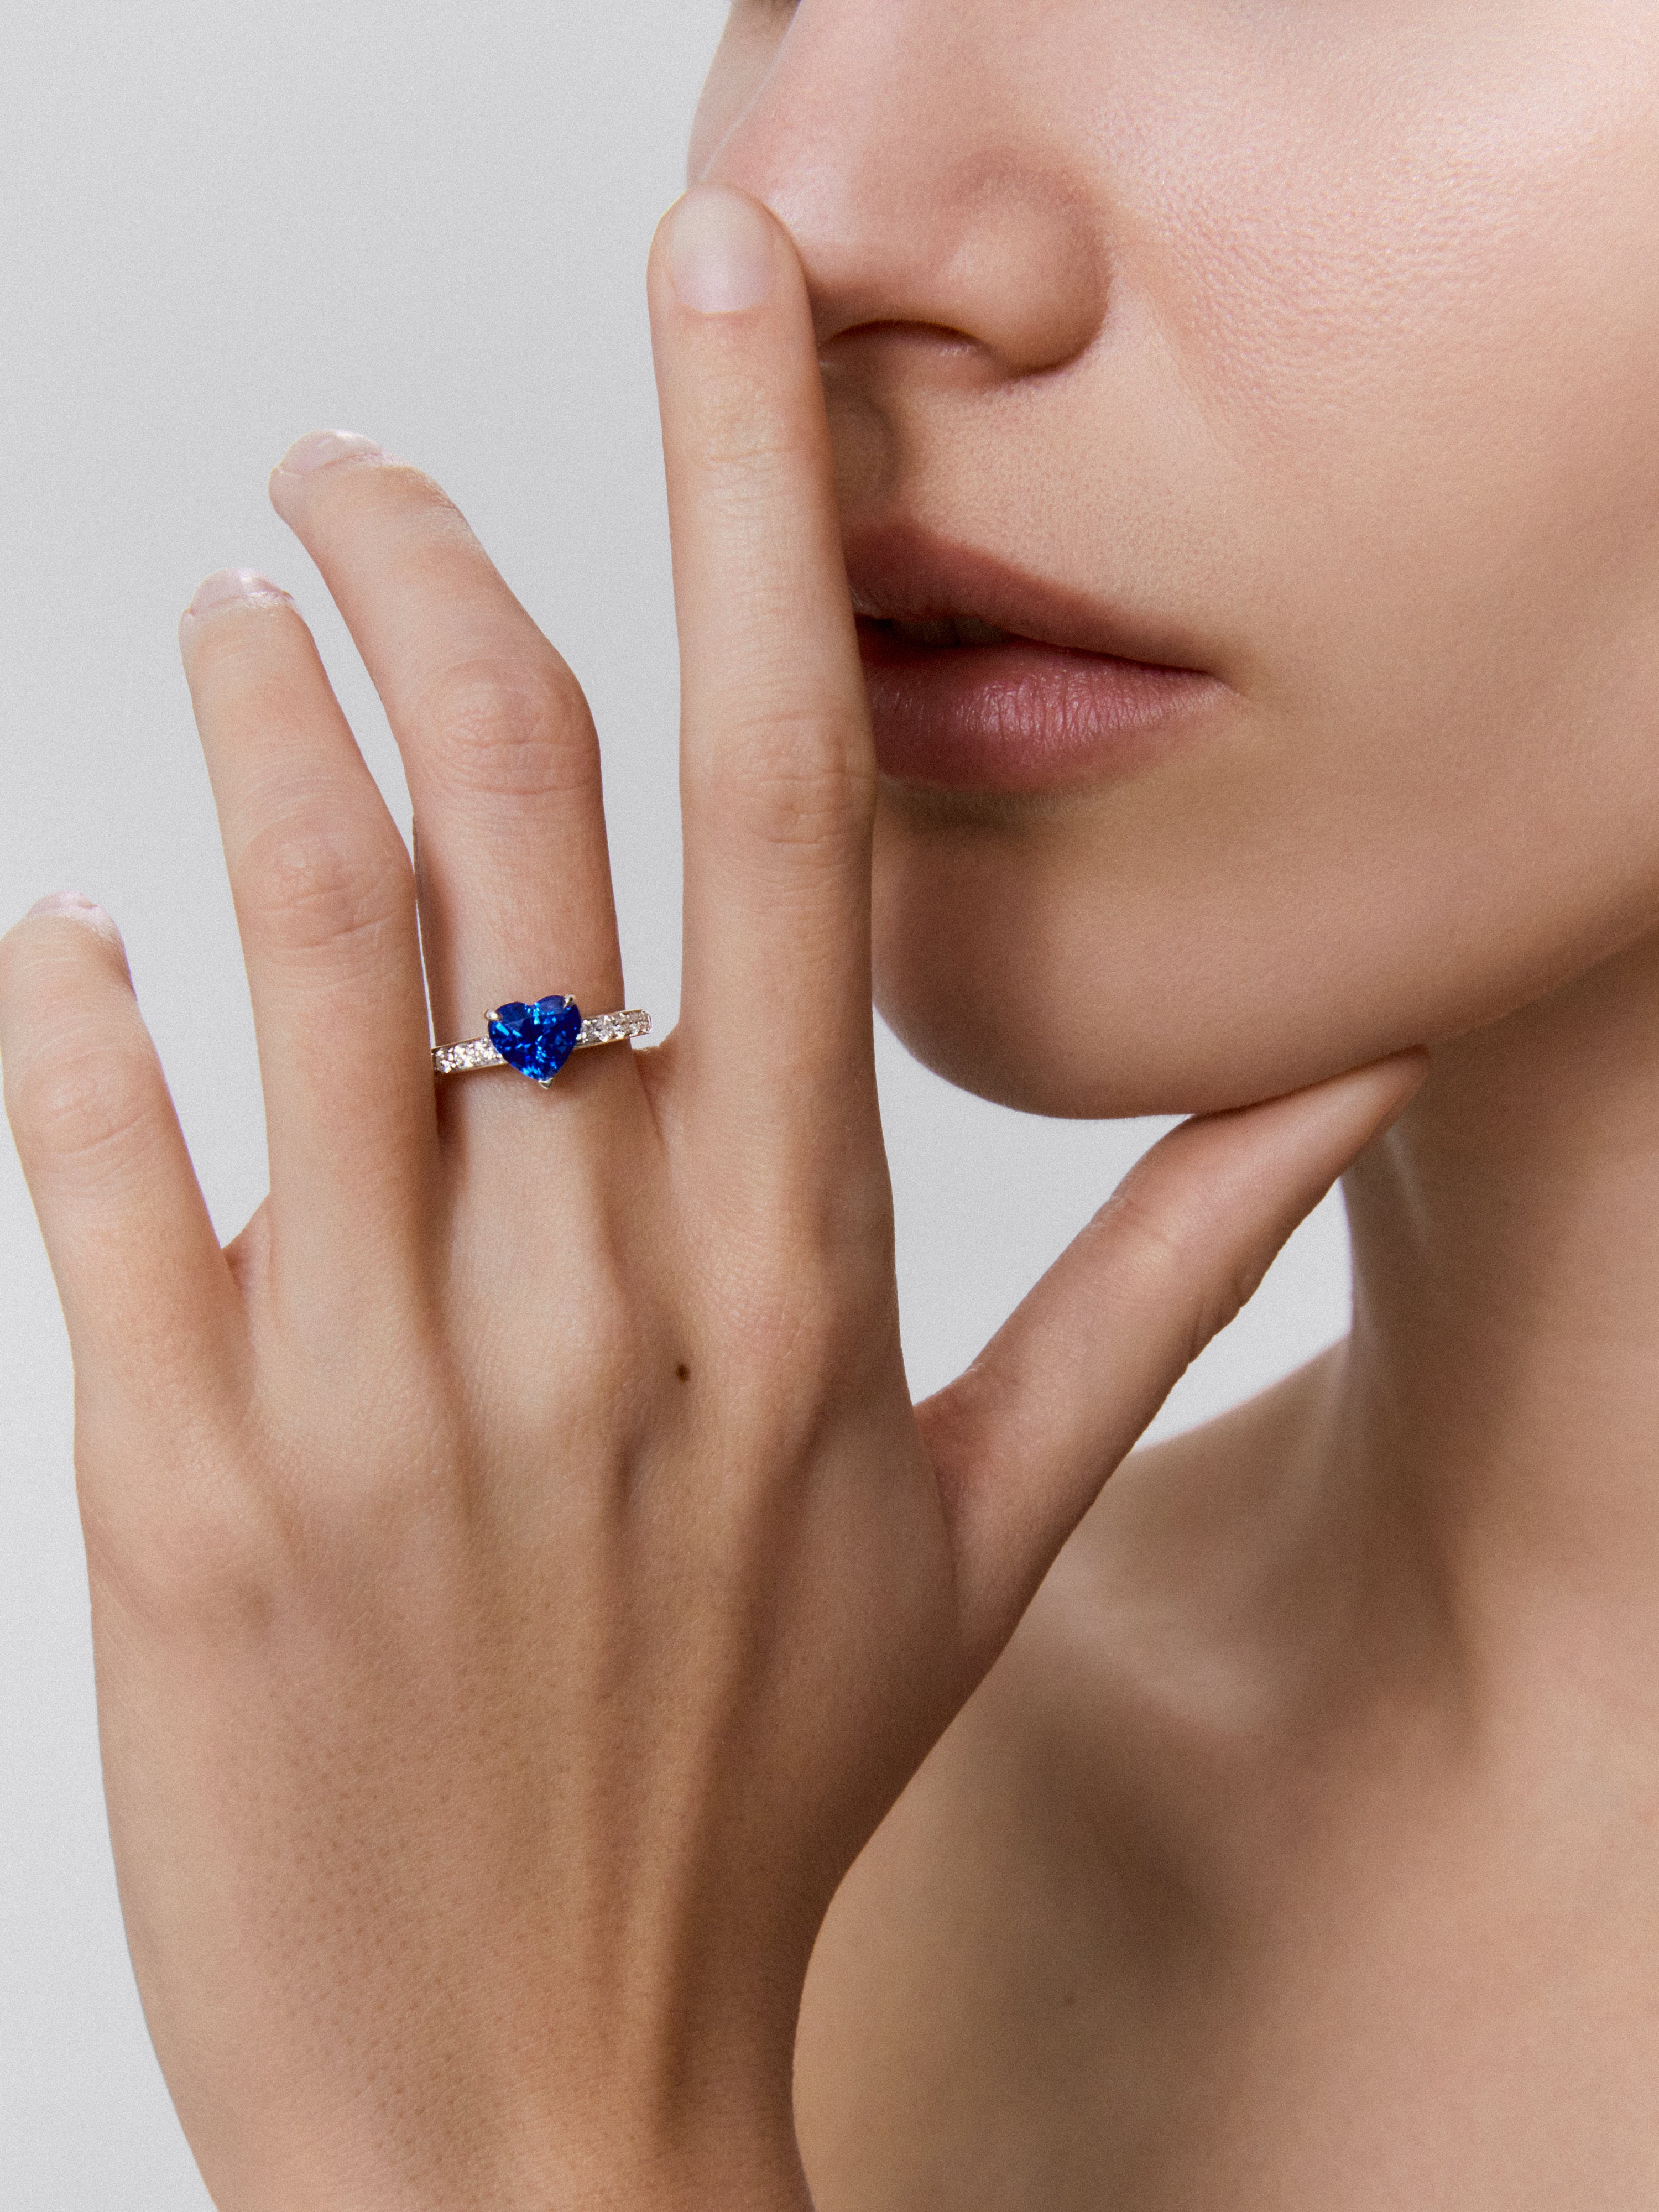 18K white gold ring with heart-cut blue sapphire of 1.6 cts and 14 brilliant-cut diamonds with a total of 0.36 cts